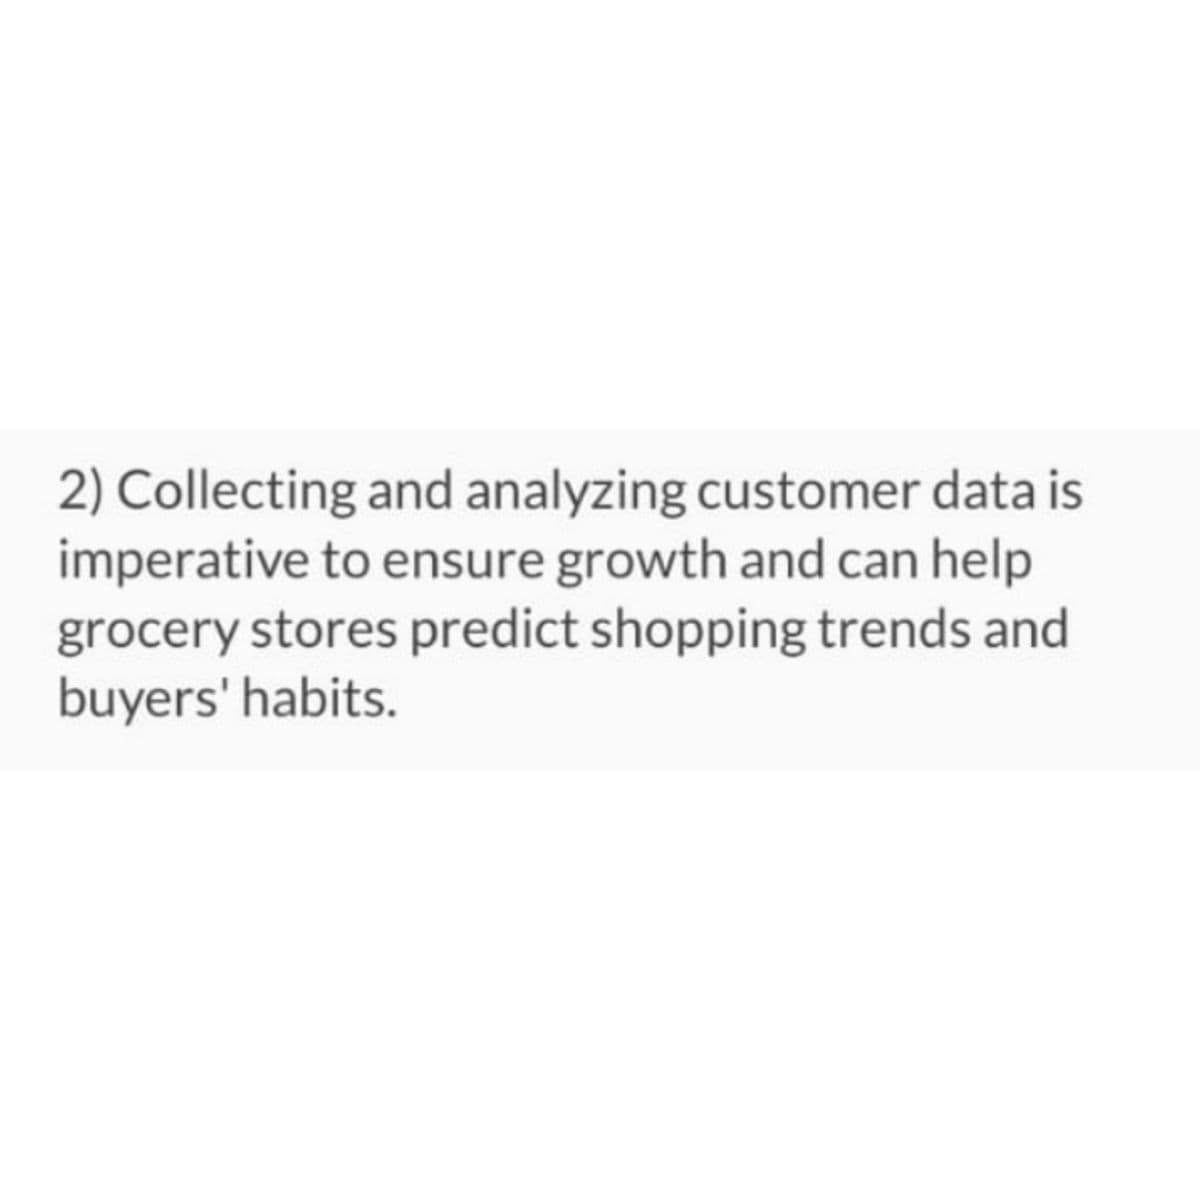 2) Collecting and analyzing customer data is
imperative to ensure growth and can help
grocery stores predict shopping trends and
buyers' habits.
